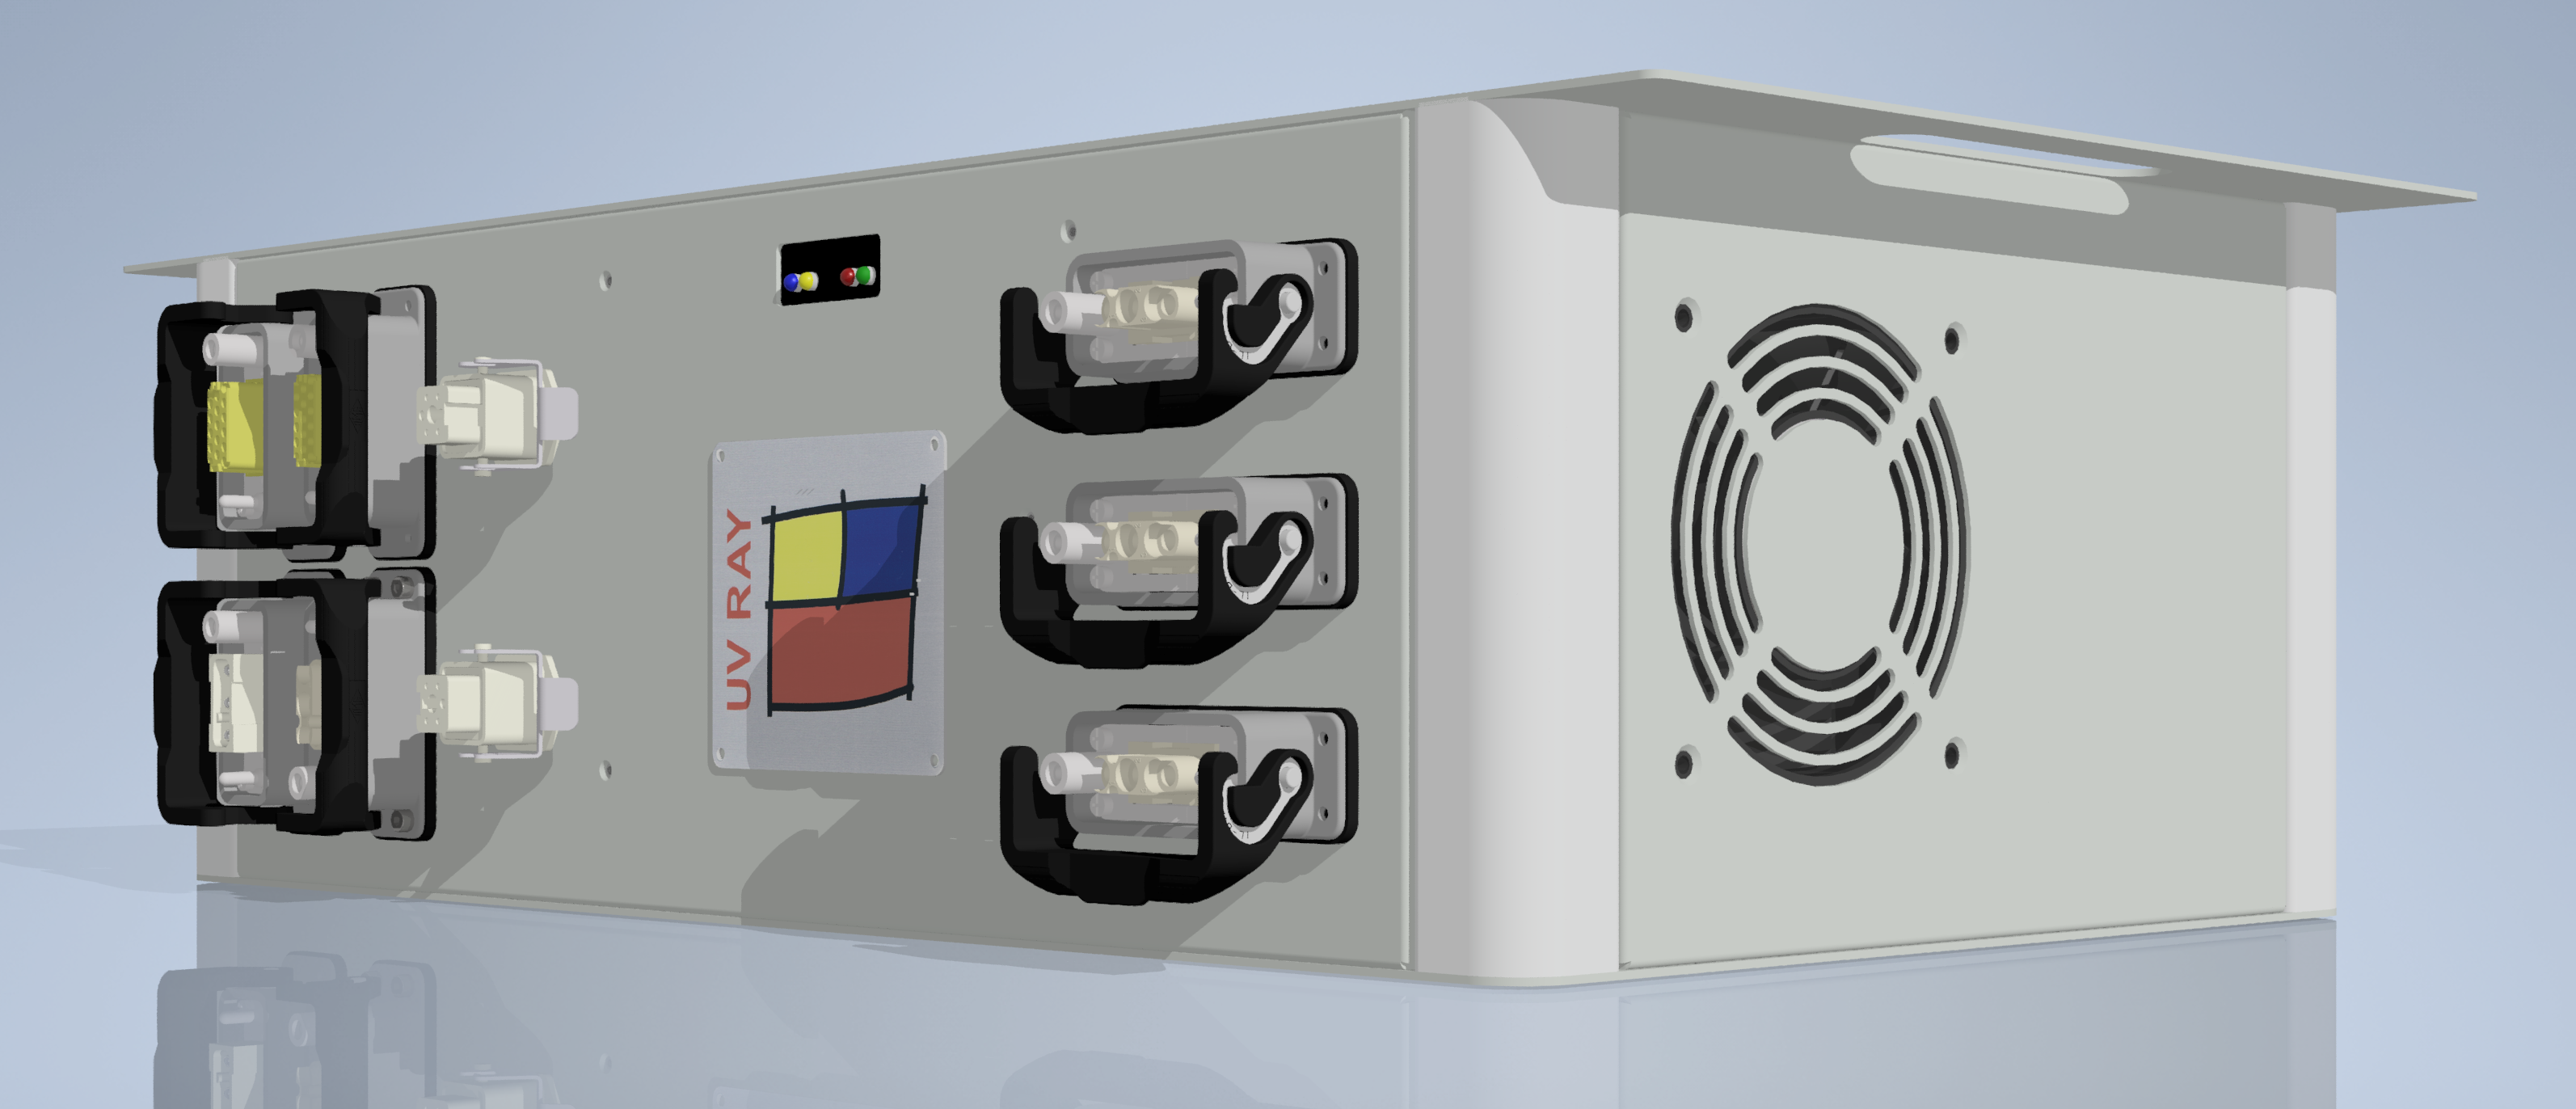 UV Ray to show new suite of power supplies and latest UV LED curing technology at Labelexpo Europe